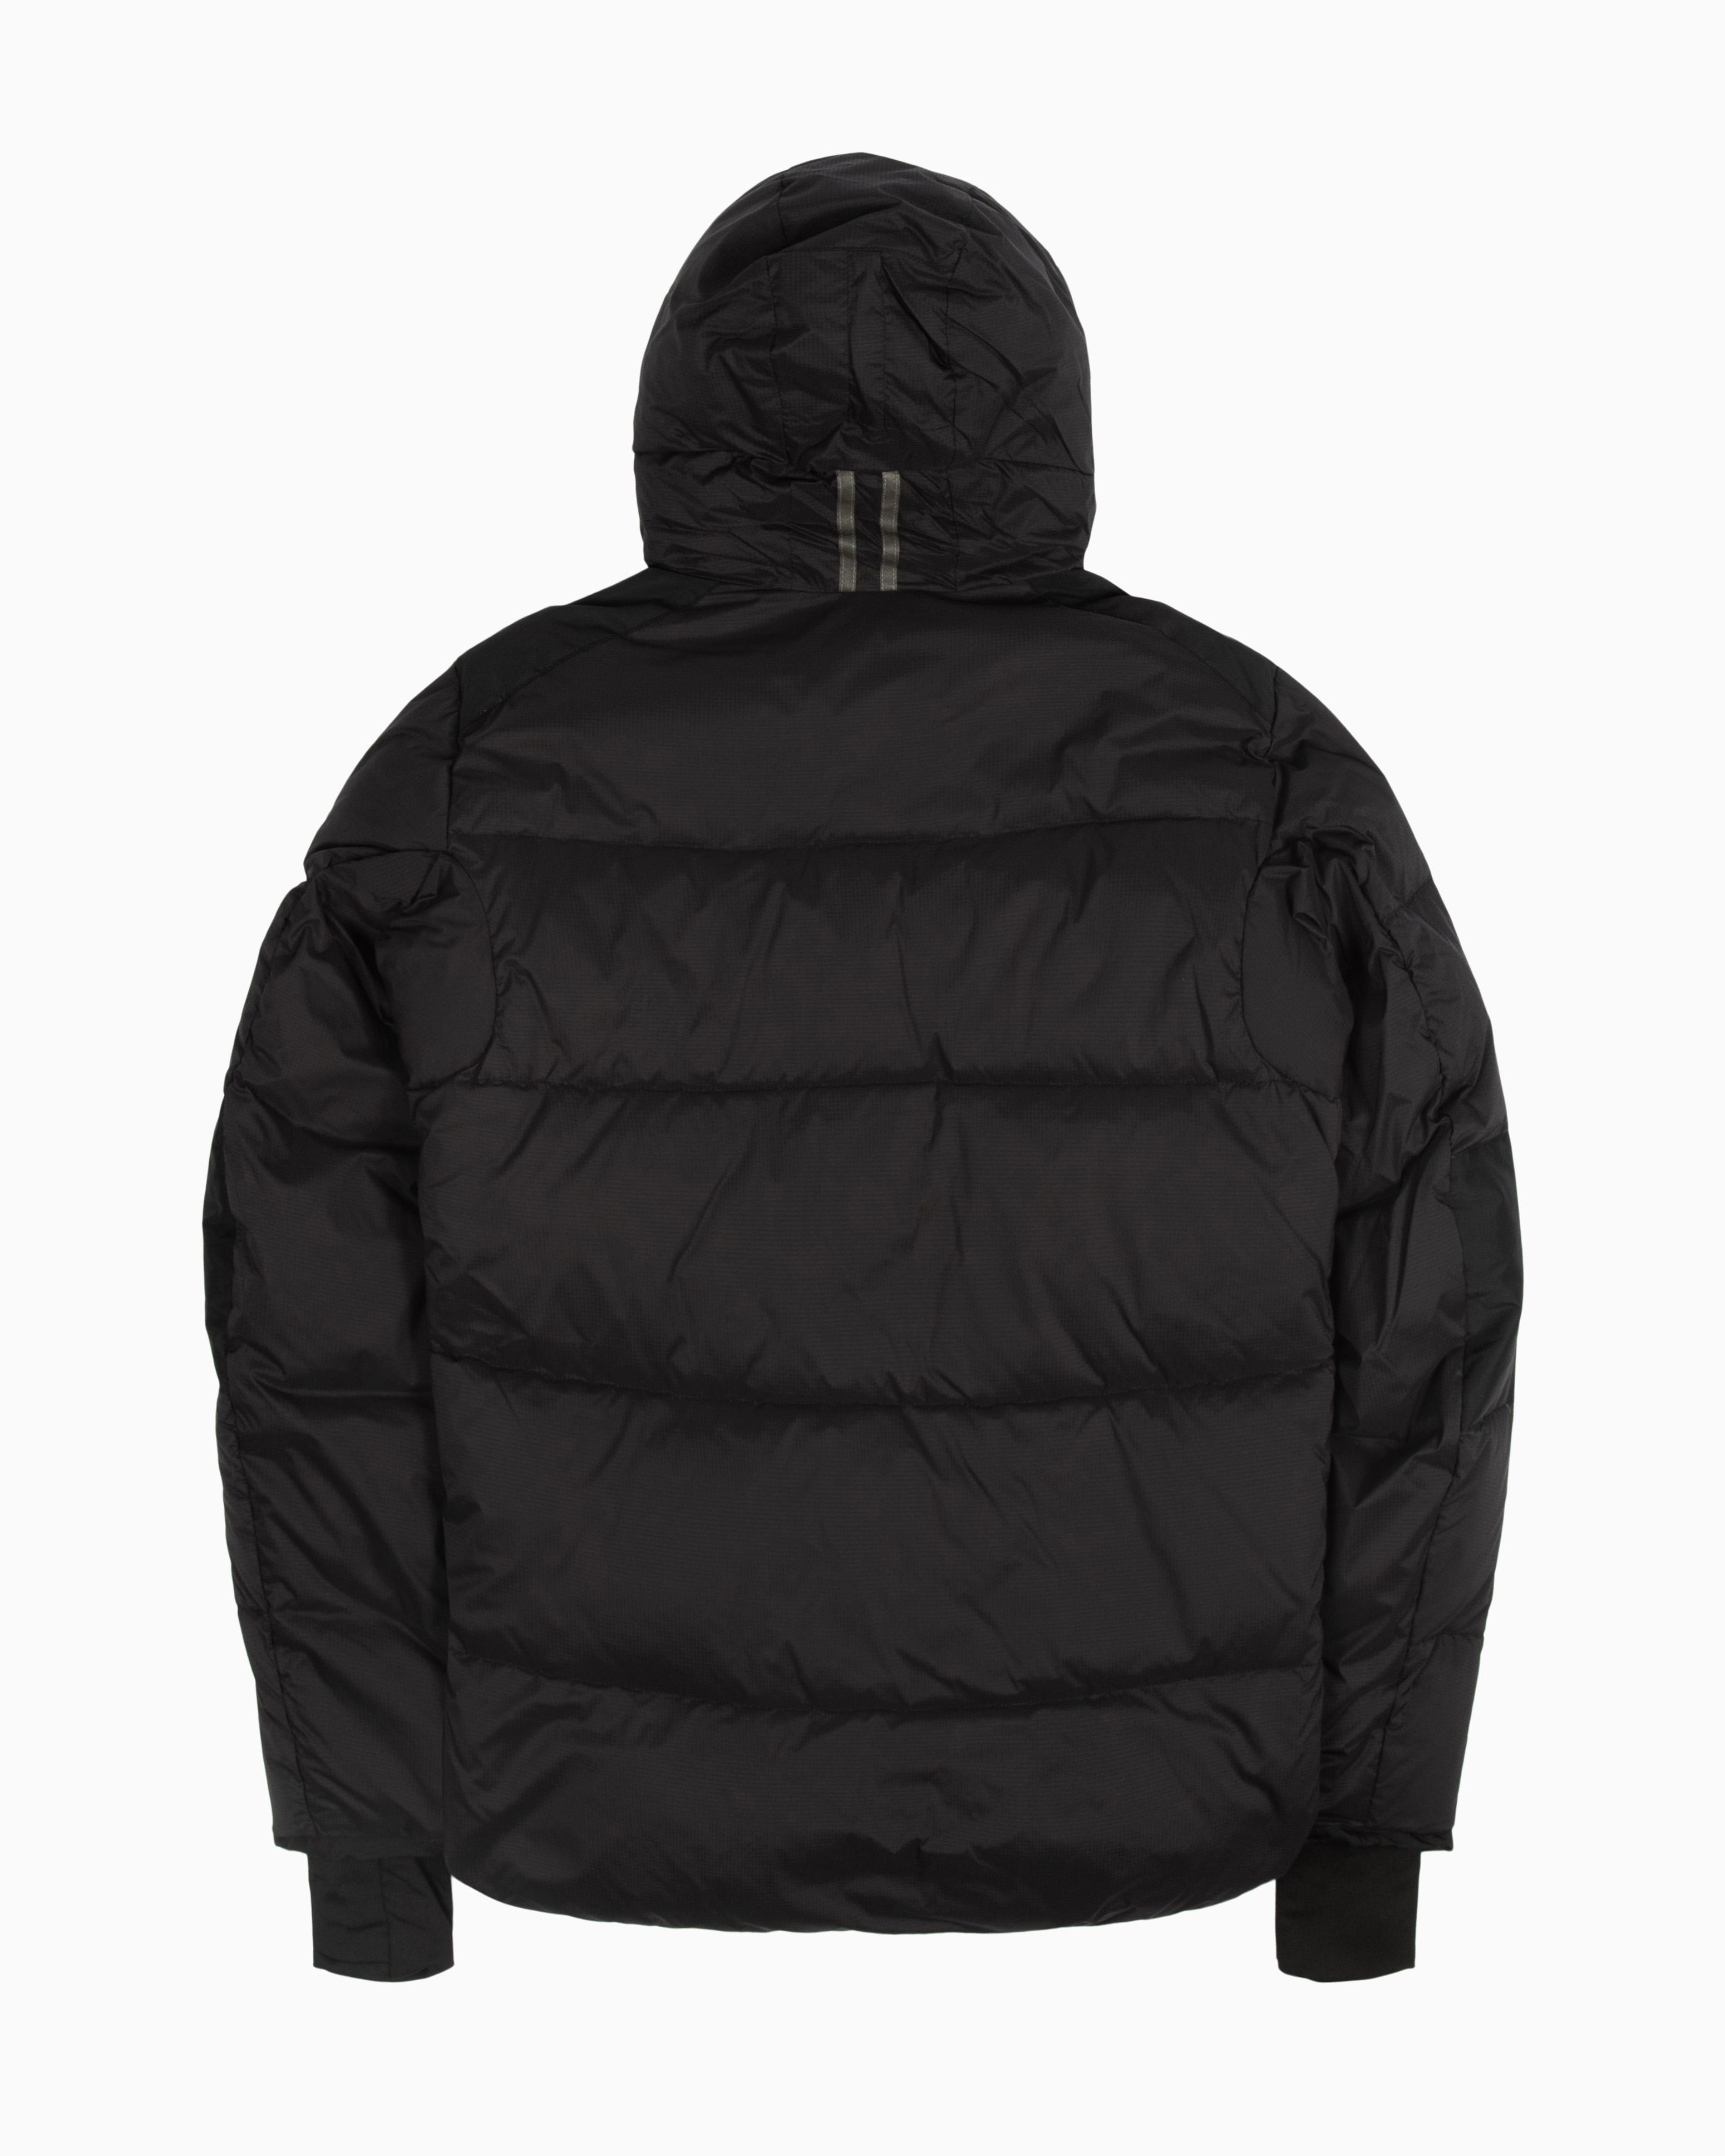 Armstrong Hoody Canada Goose Outerwear Jackets Black